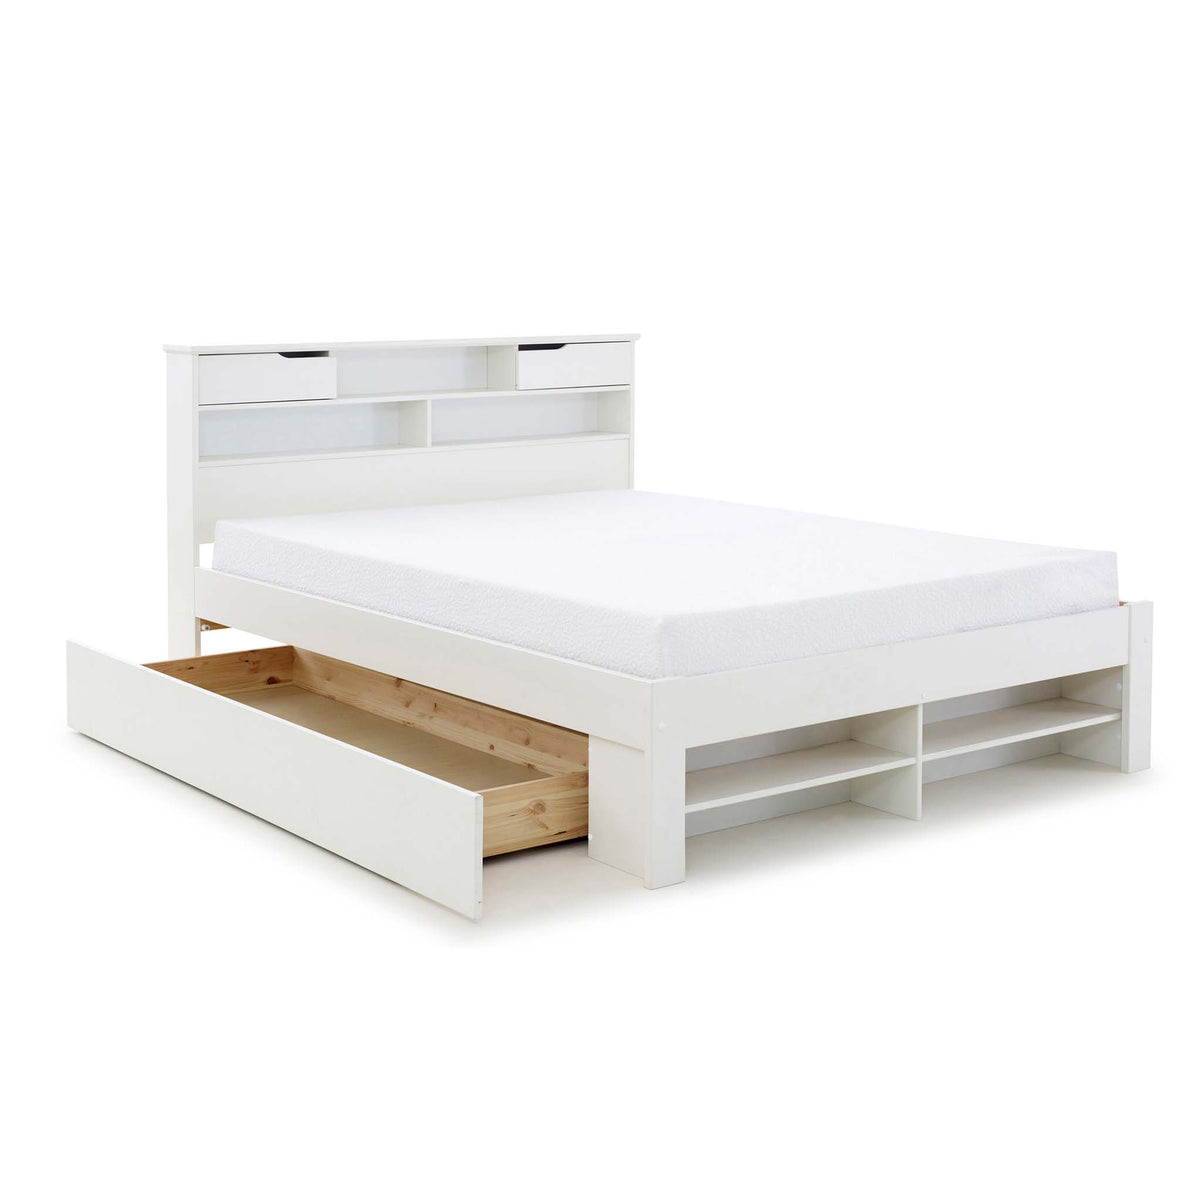 Farndon White Storage Bed with Drawers from Roseland Furniture